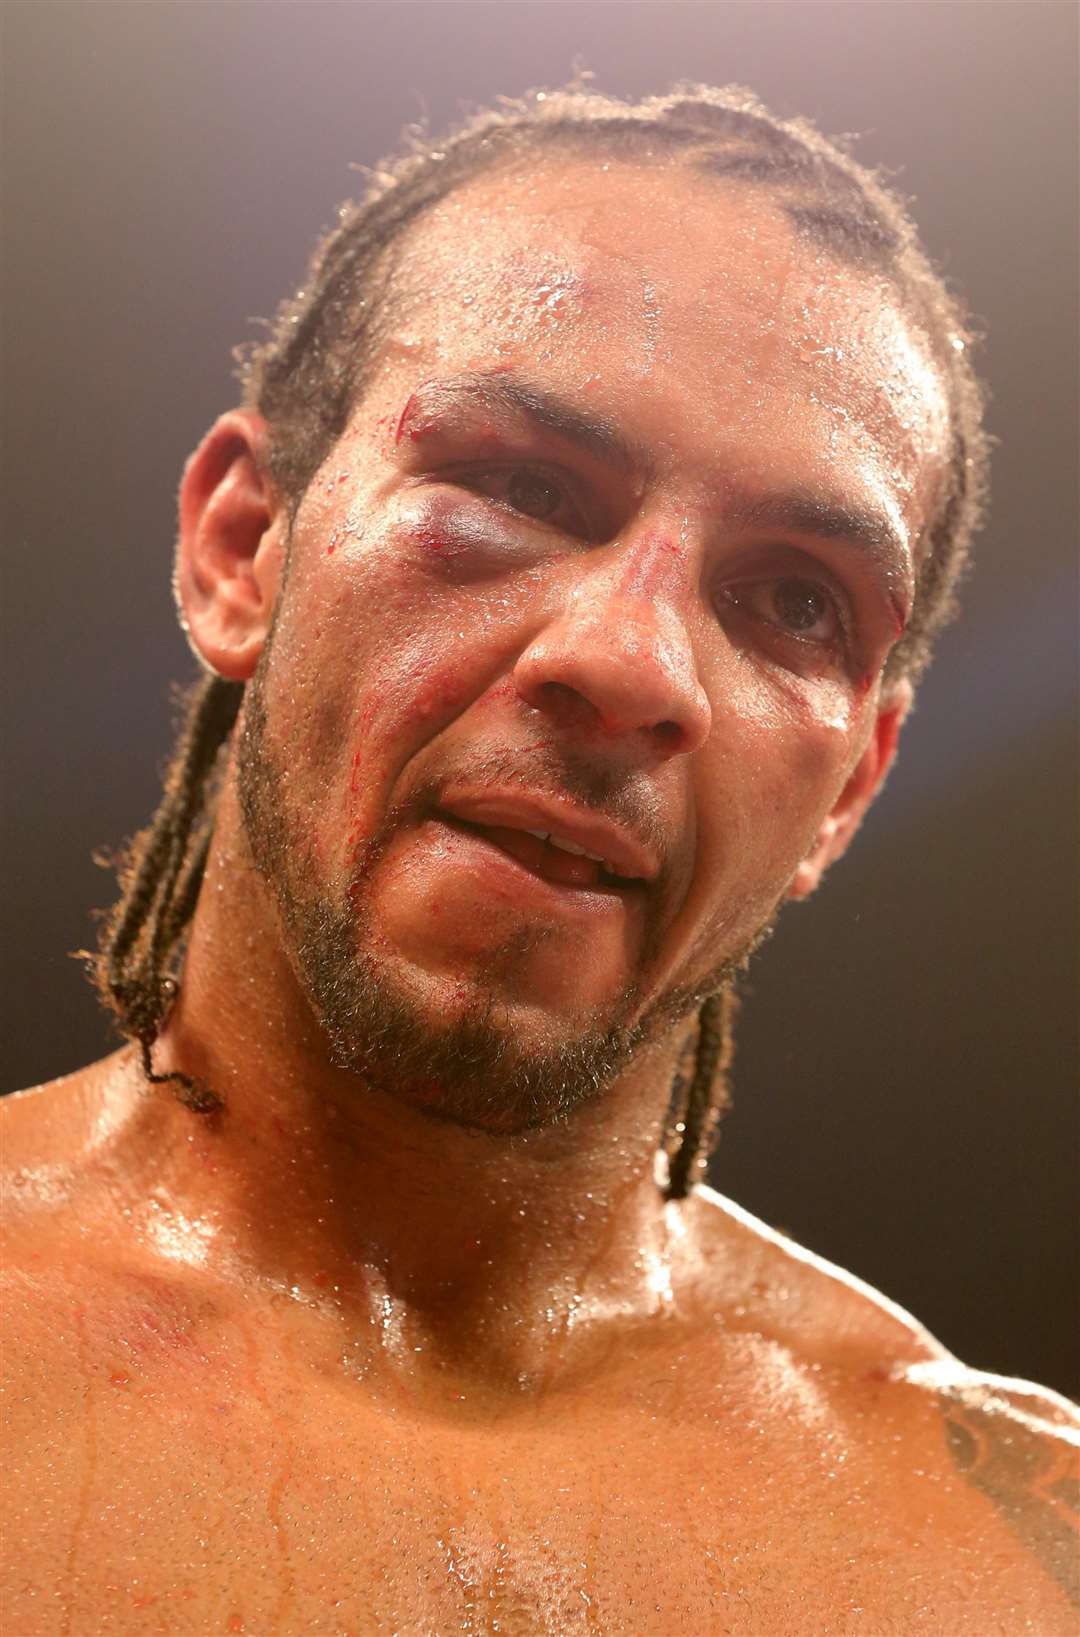 Wadi Camacho displays a black eye after losing to China Clarke during the Vacant English Cruiserweight Championship fight at Wembley Arena, London (PA)